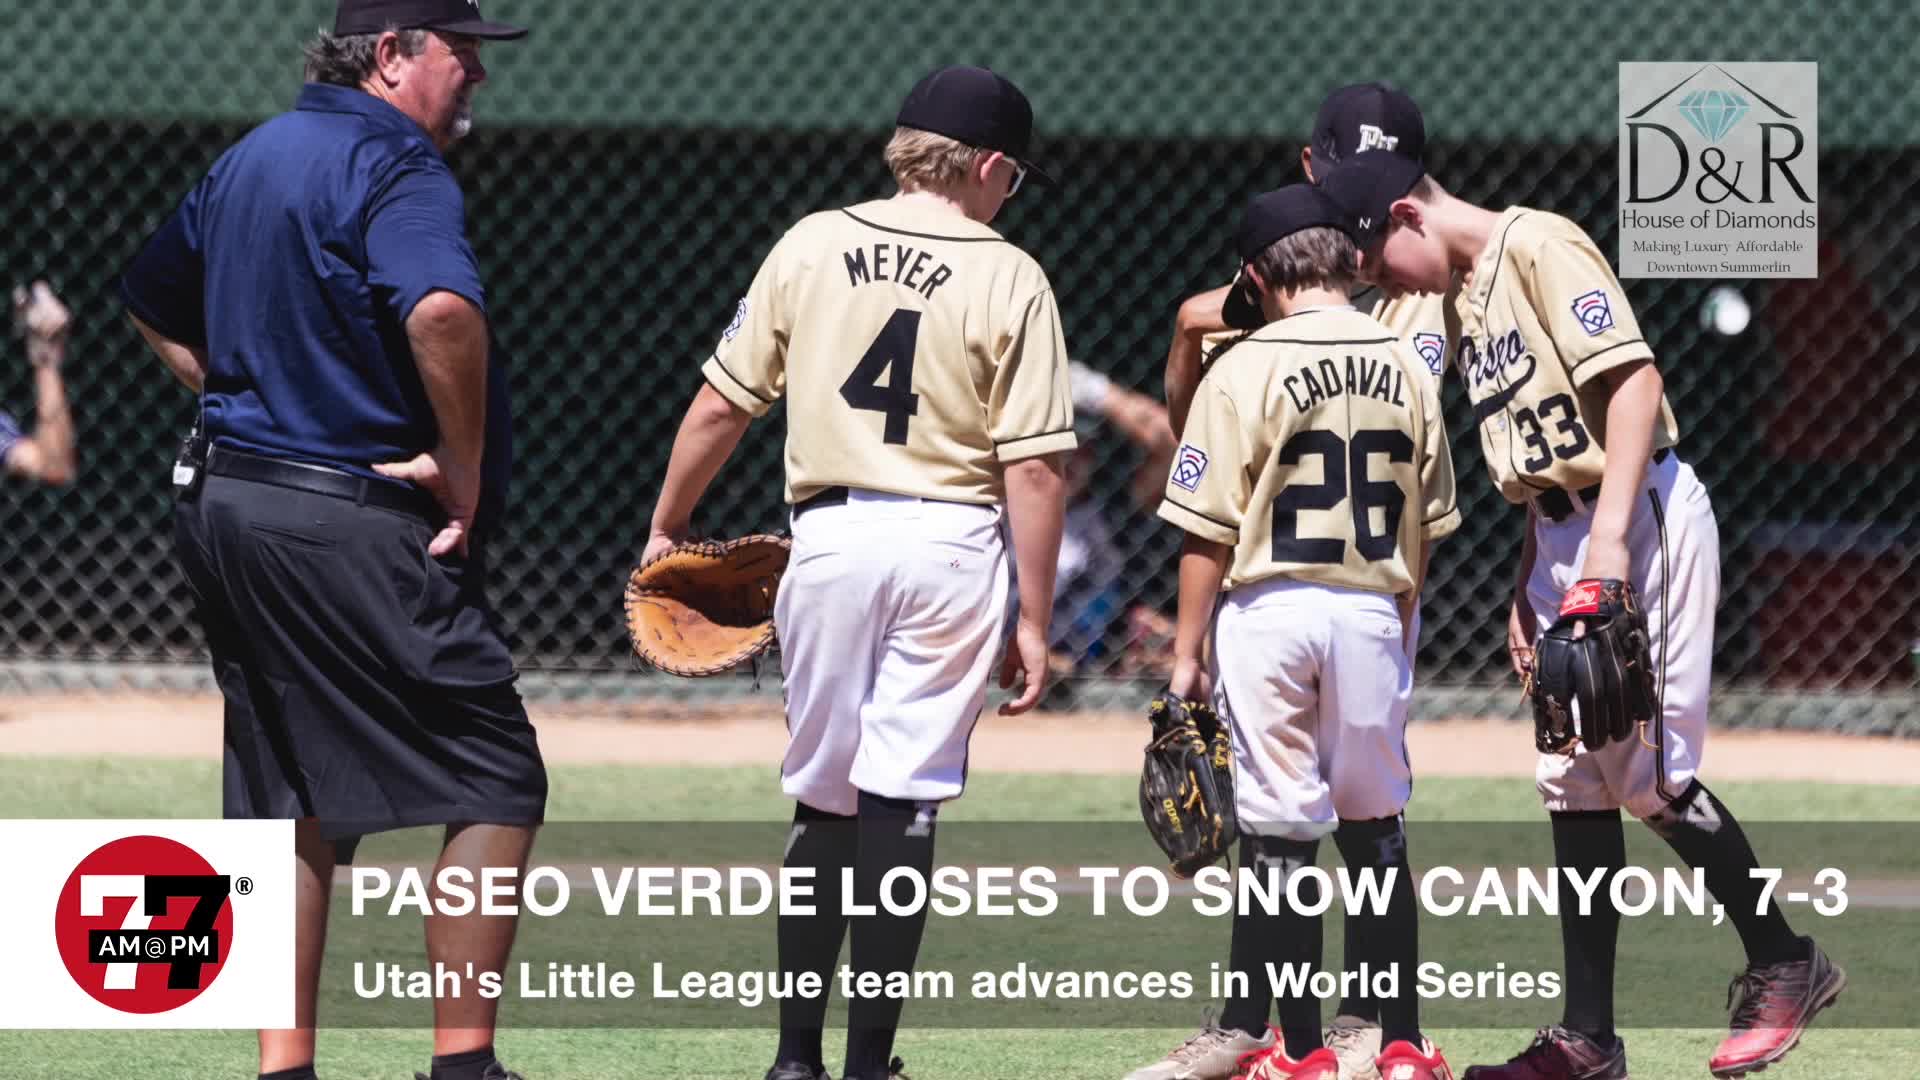 Paseo Verde loses in LLWS